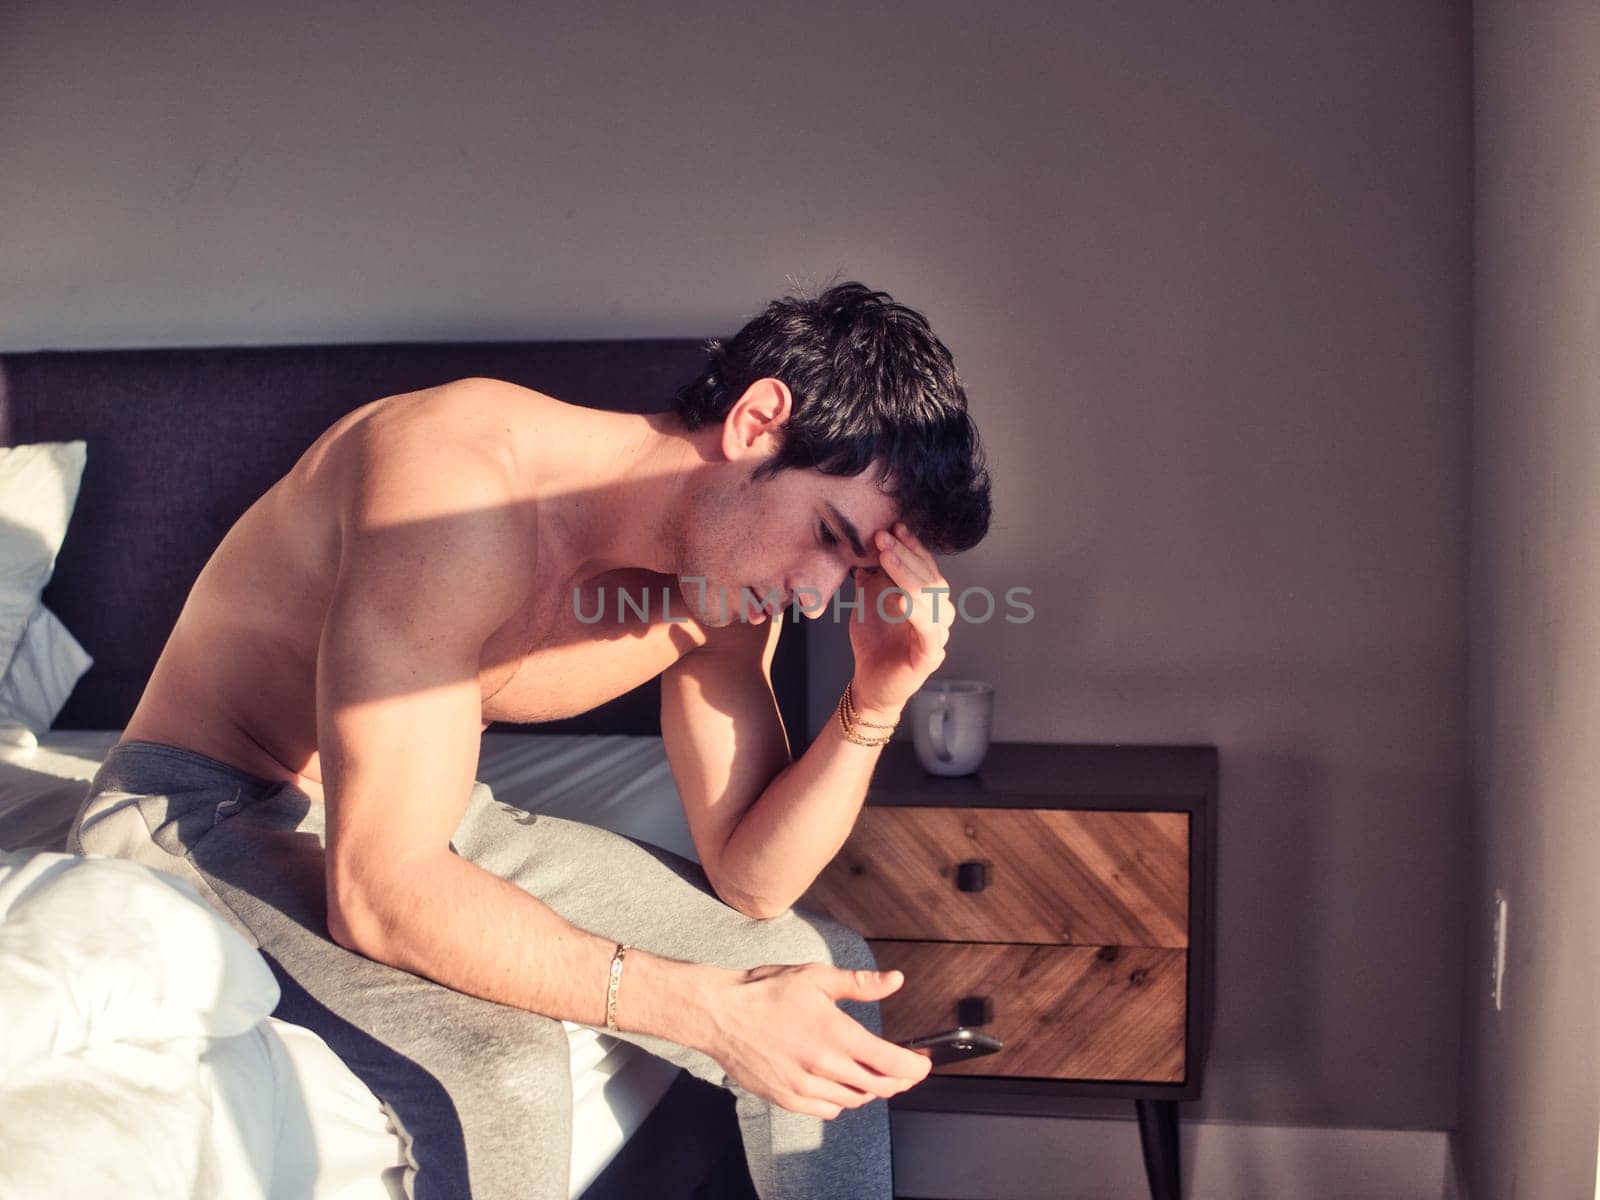 A shirtless man sitting on top of a bed, looking at his cell phone with a worried or sad expression